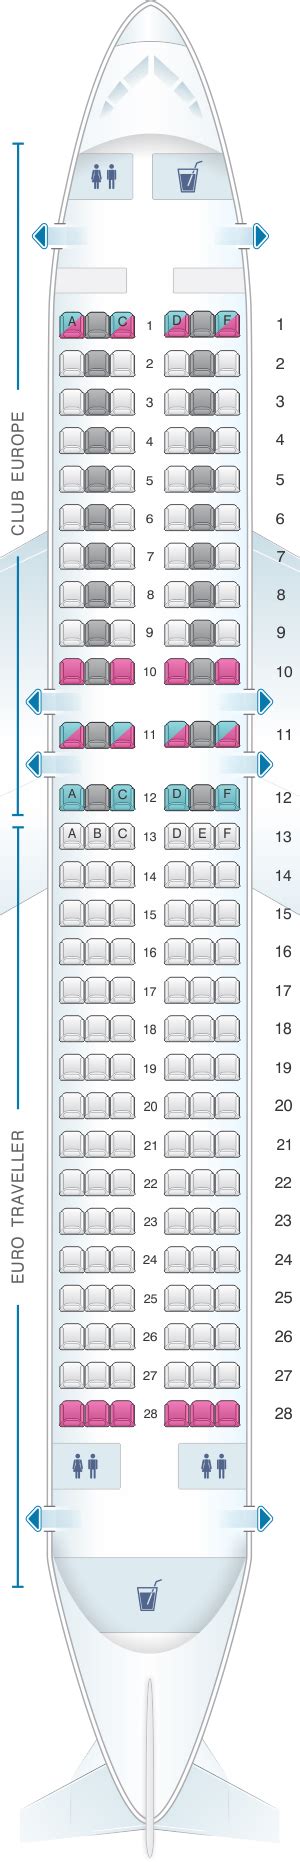 Airbus A Seating Chart Black Sea Map Porn Sex Picture